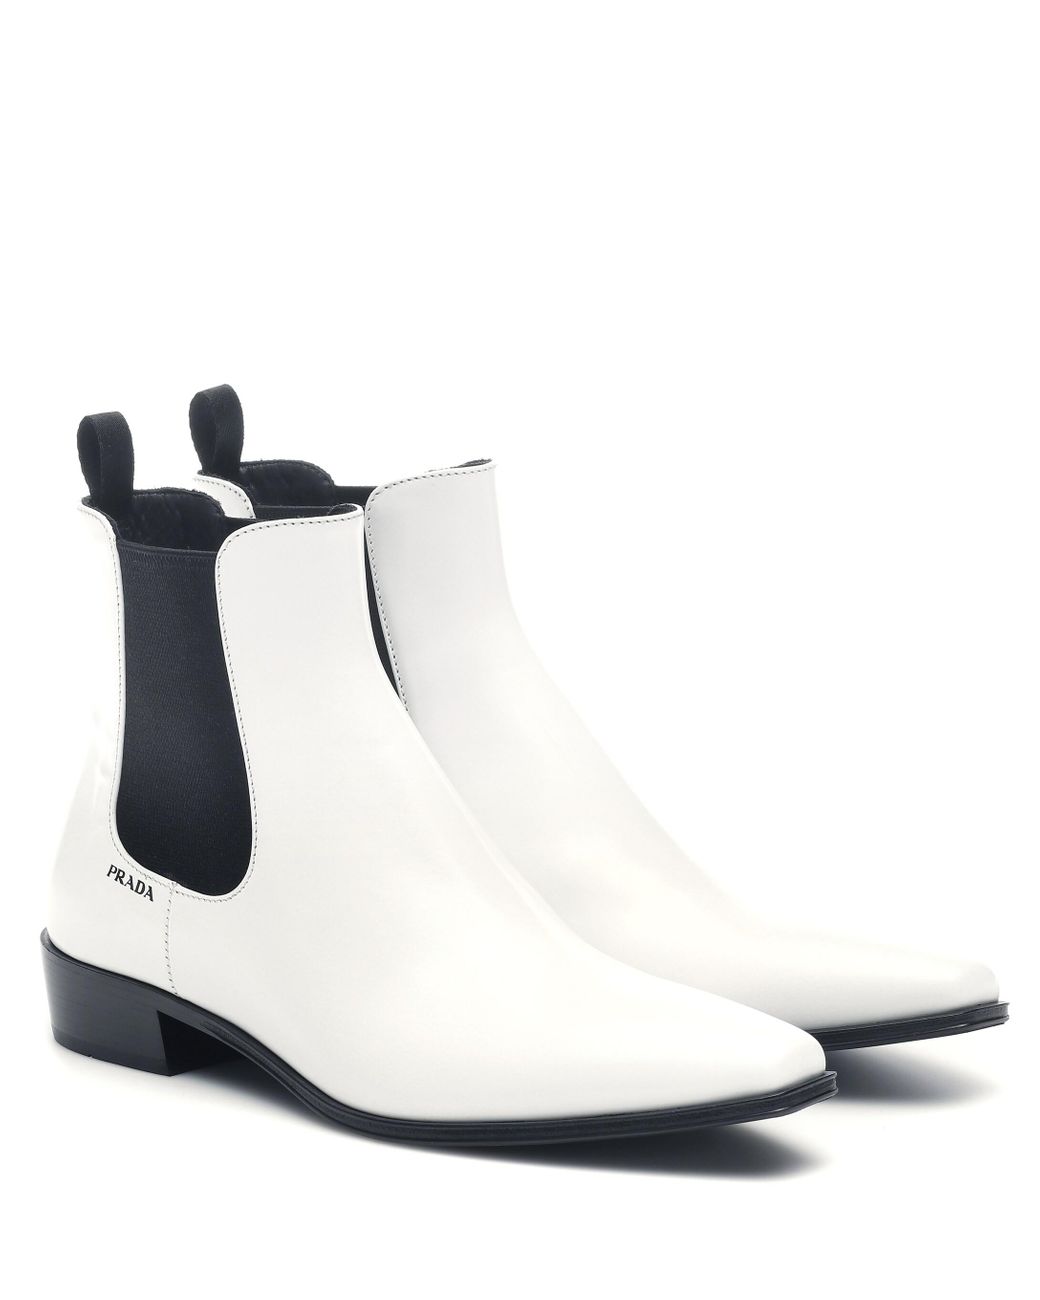 Prada Leather Ankle Boots in White - Save 60% - Lyst